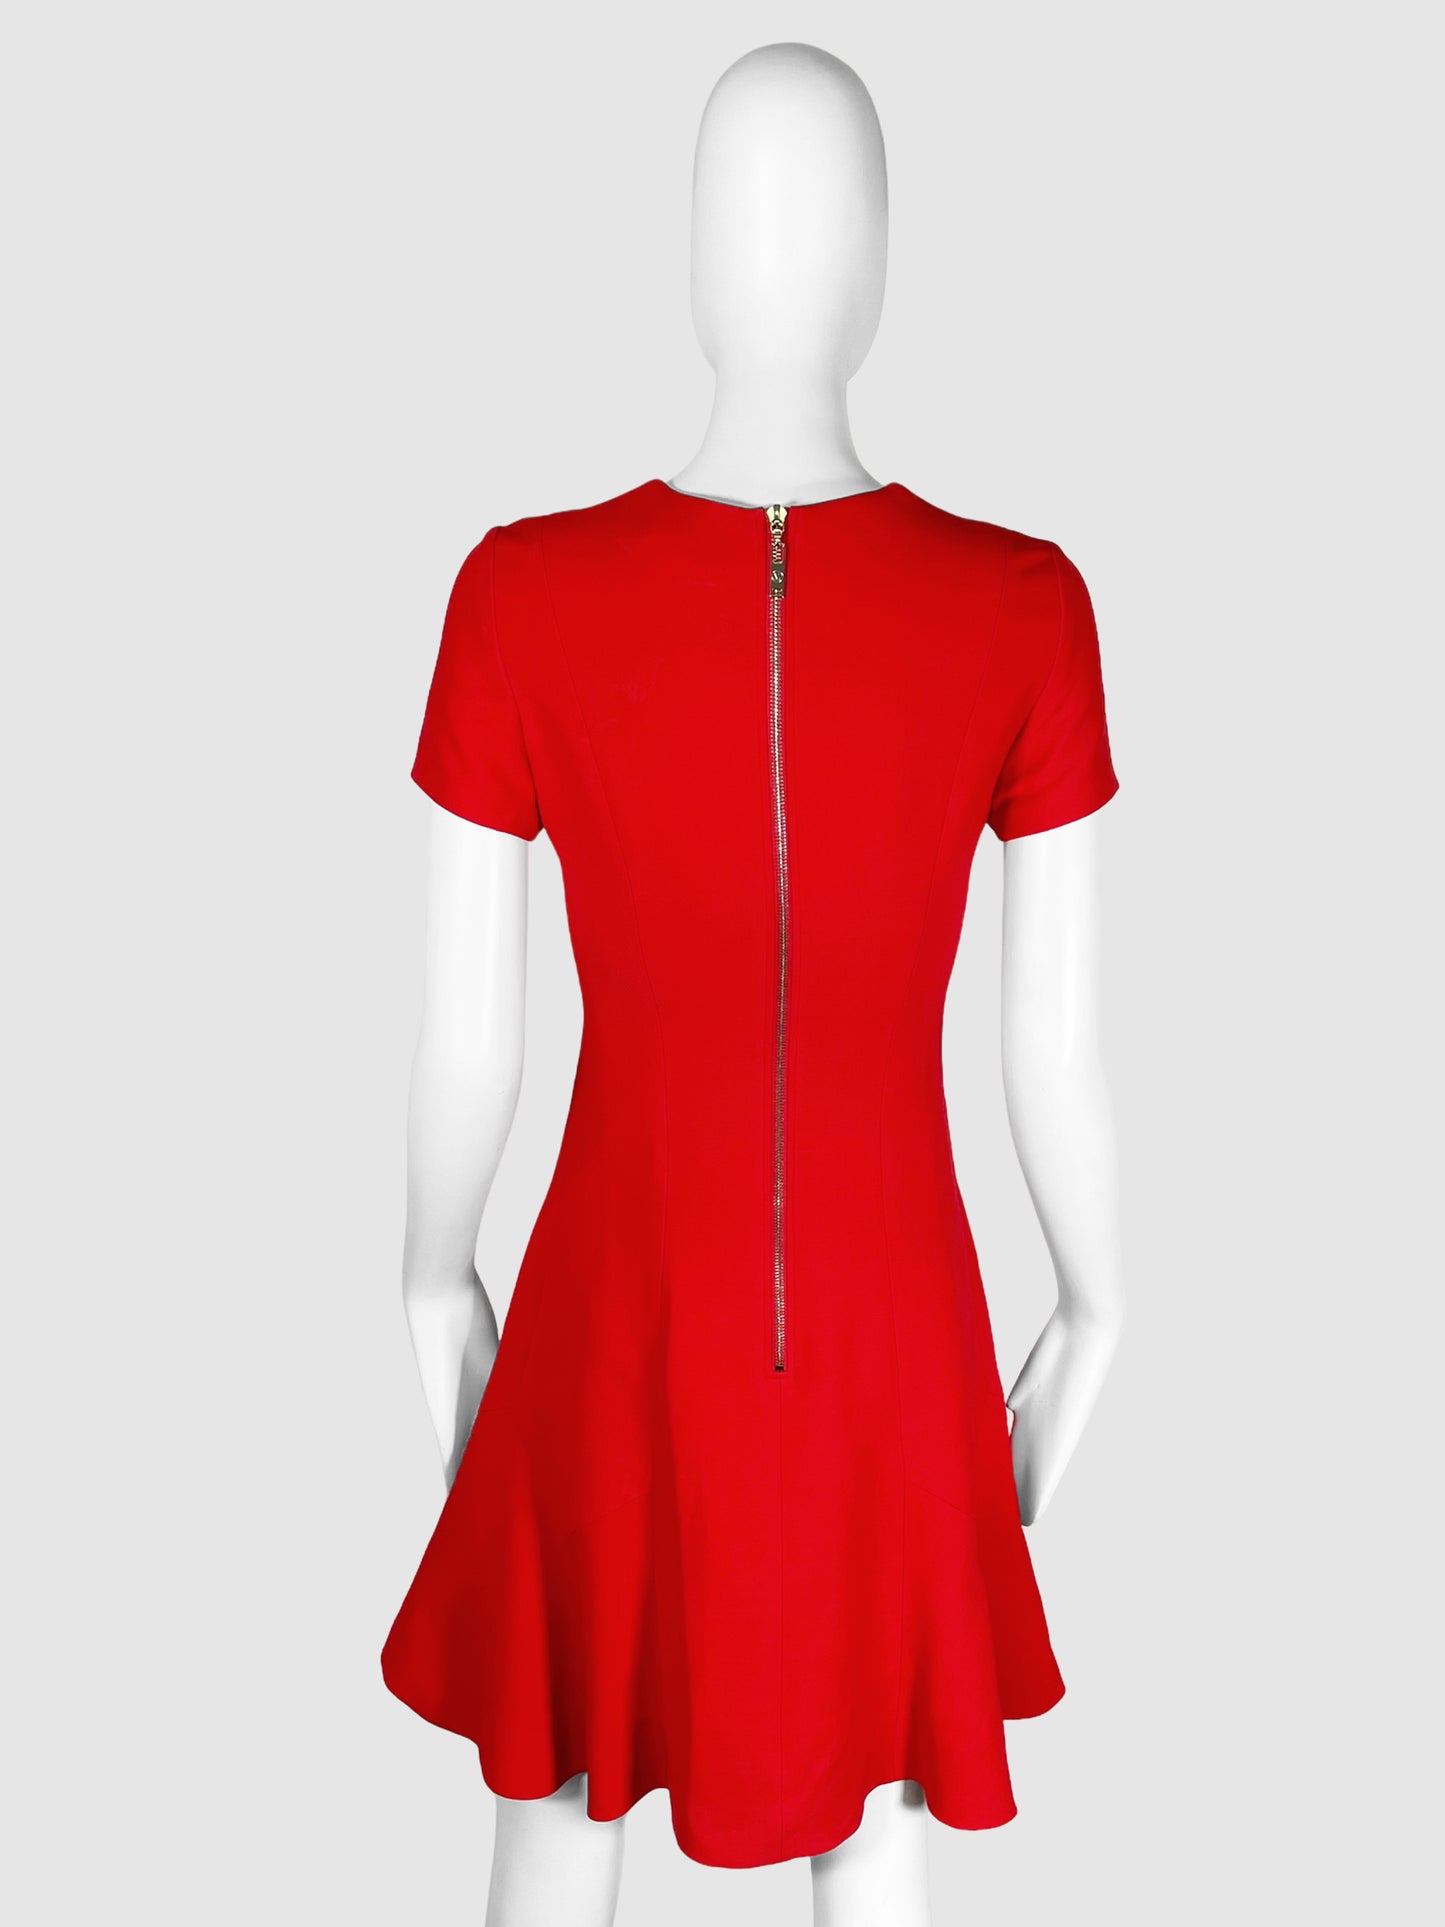 Louis Vuitton Fit and Flare Dress - Size 2